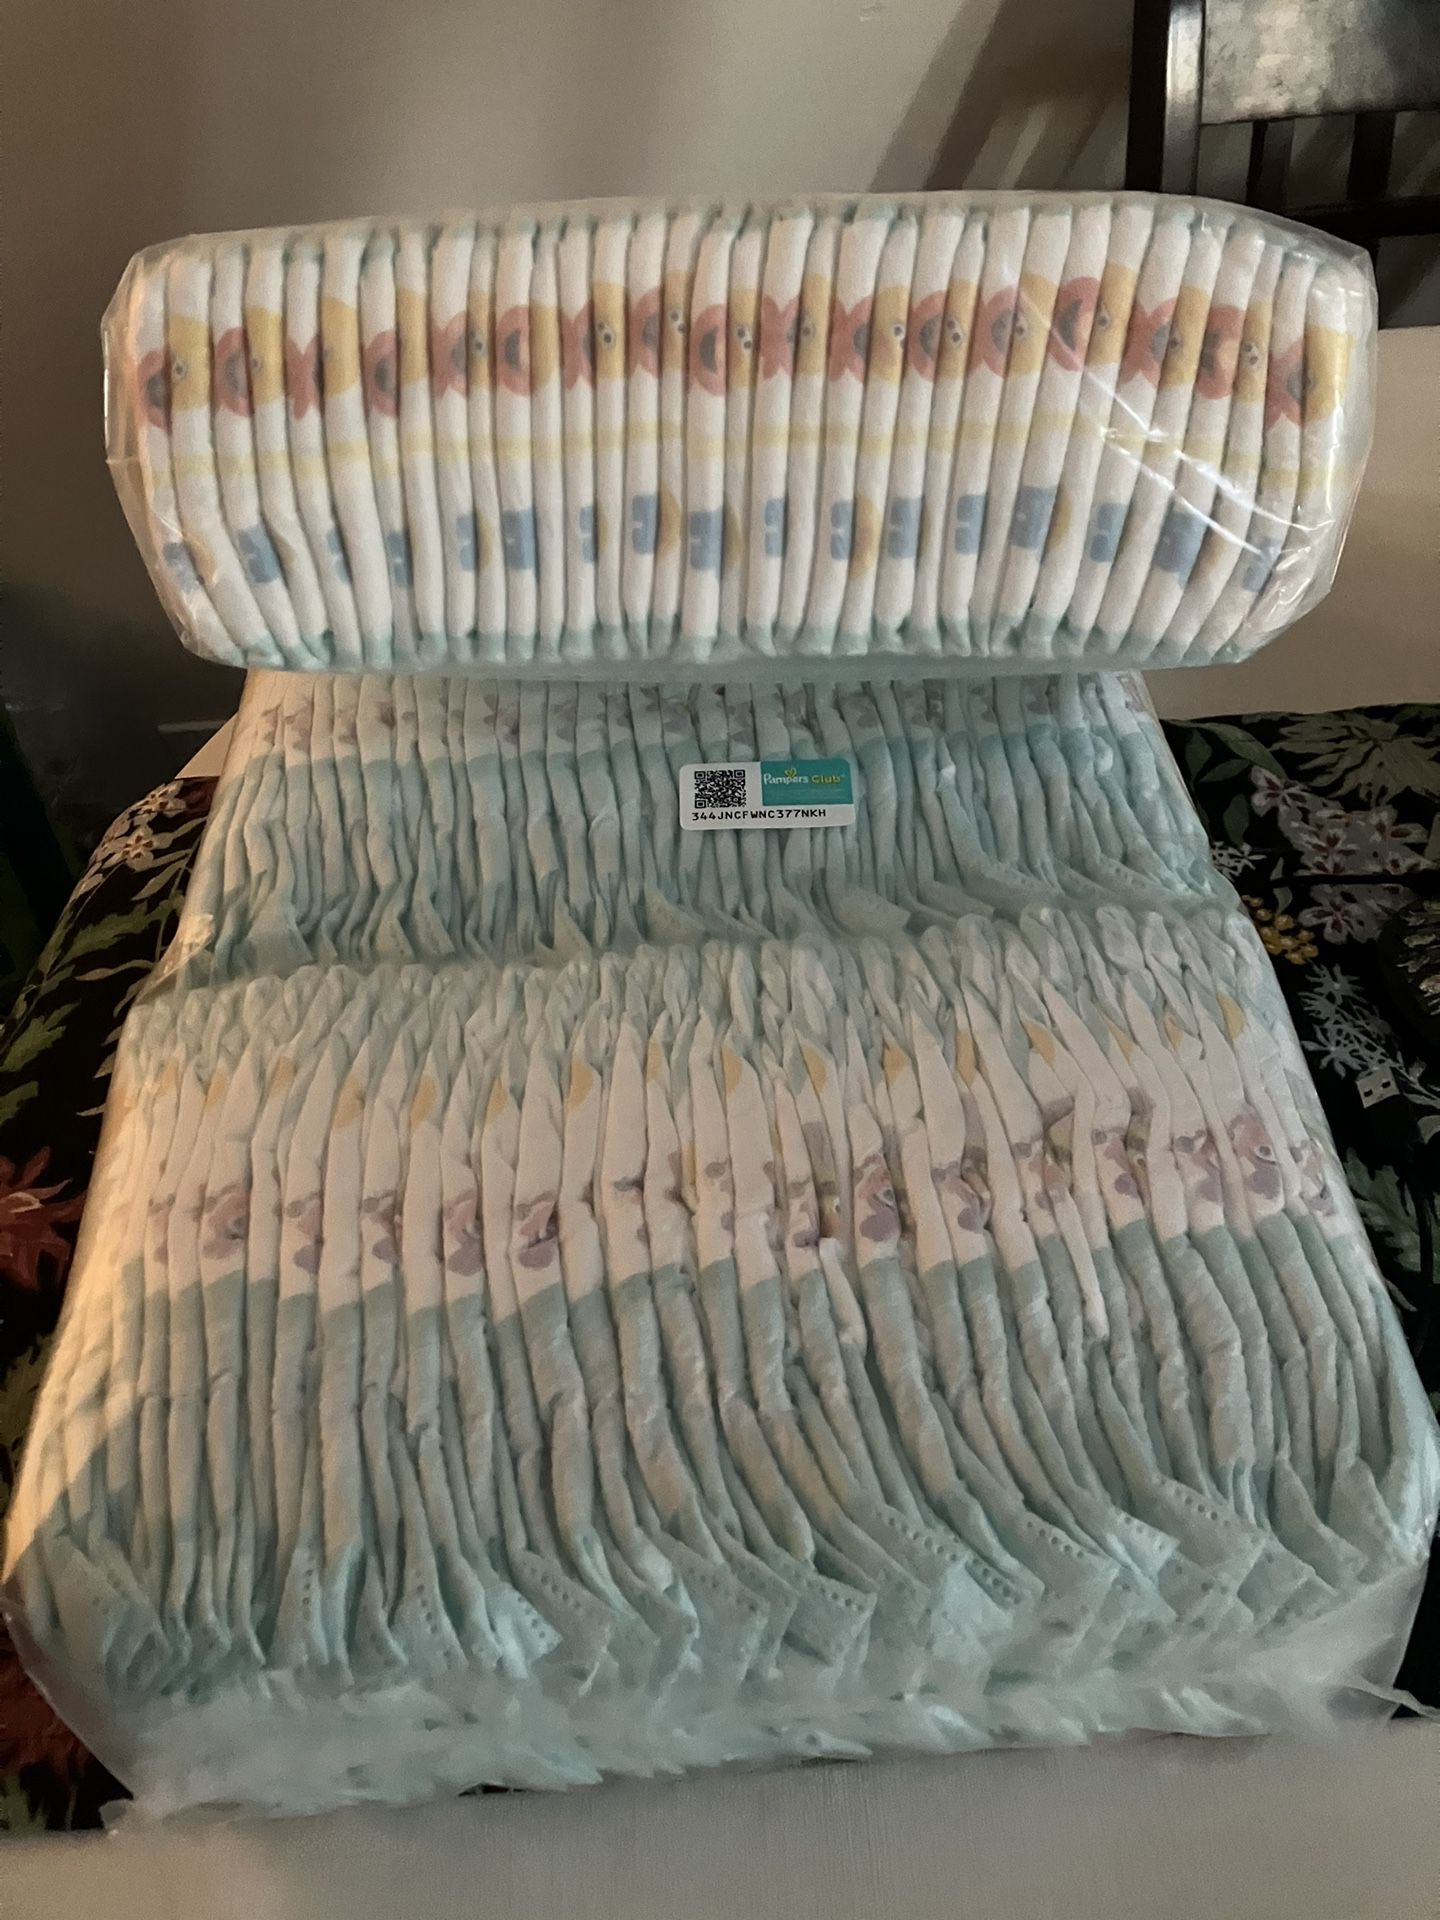 128 Count Of Pampers Size One 